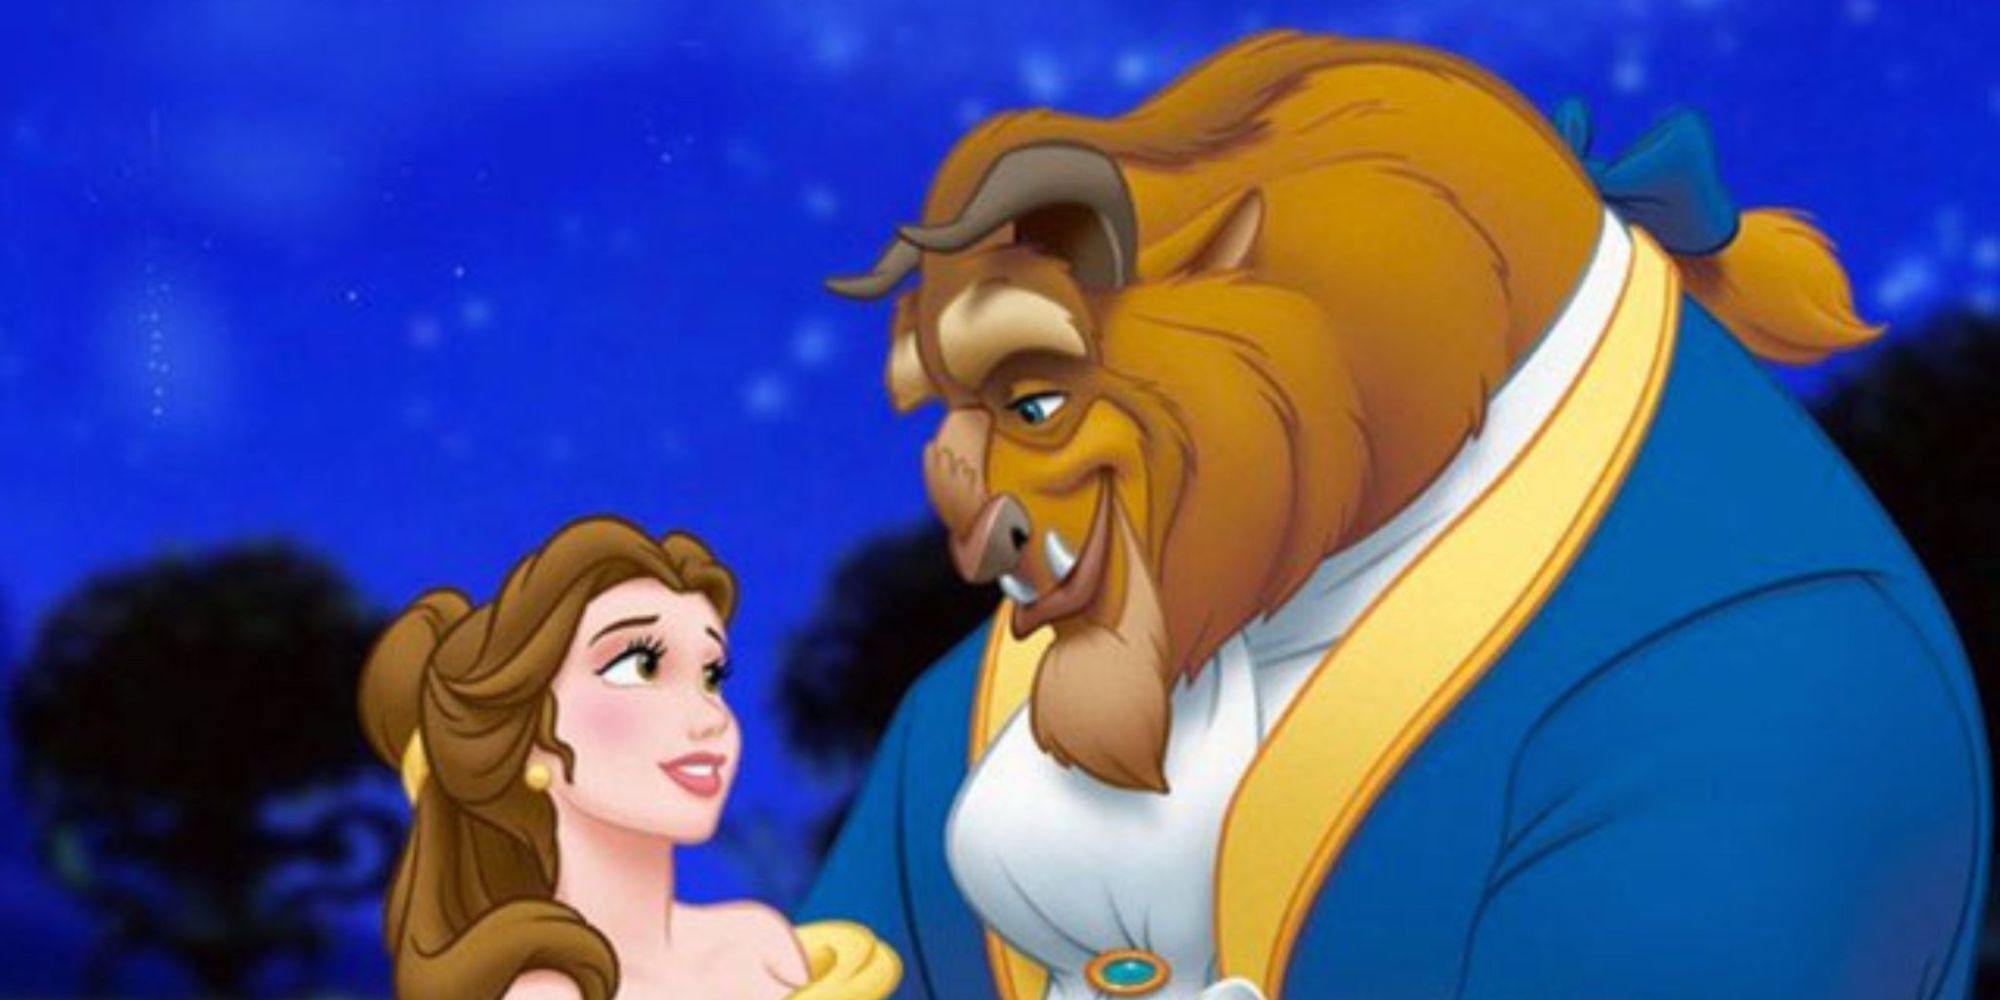 Belle and the Beast embrace